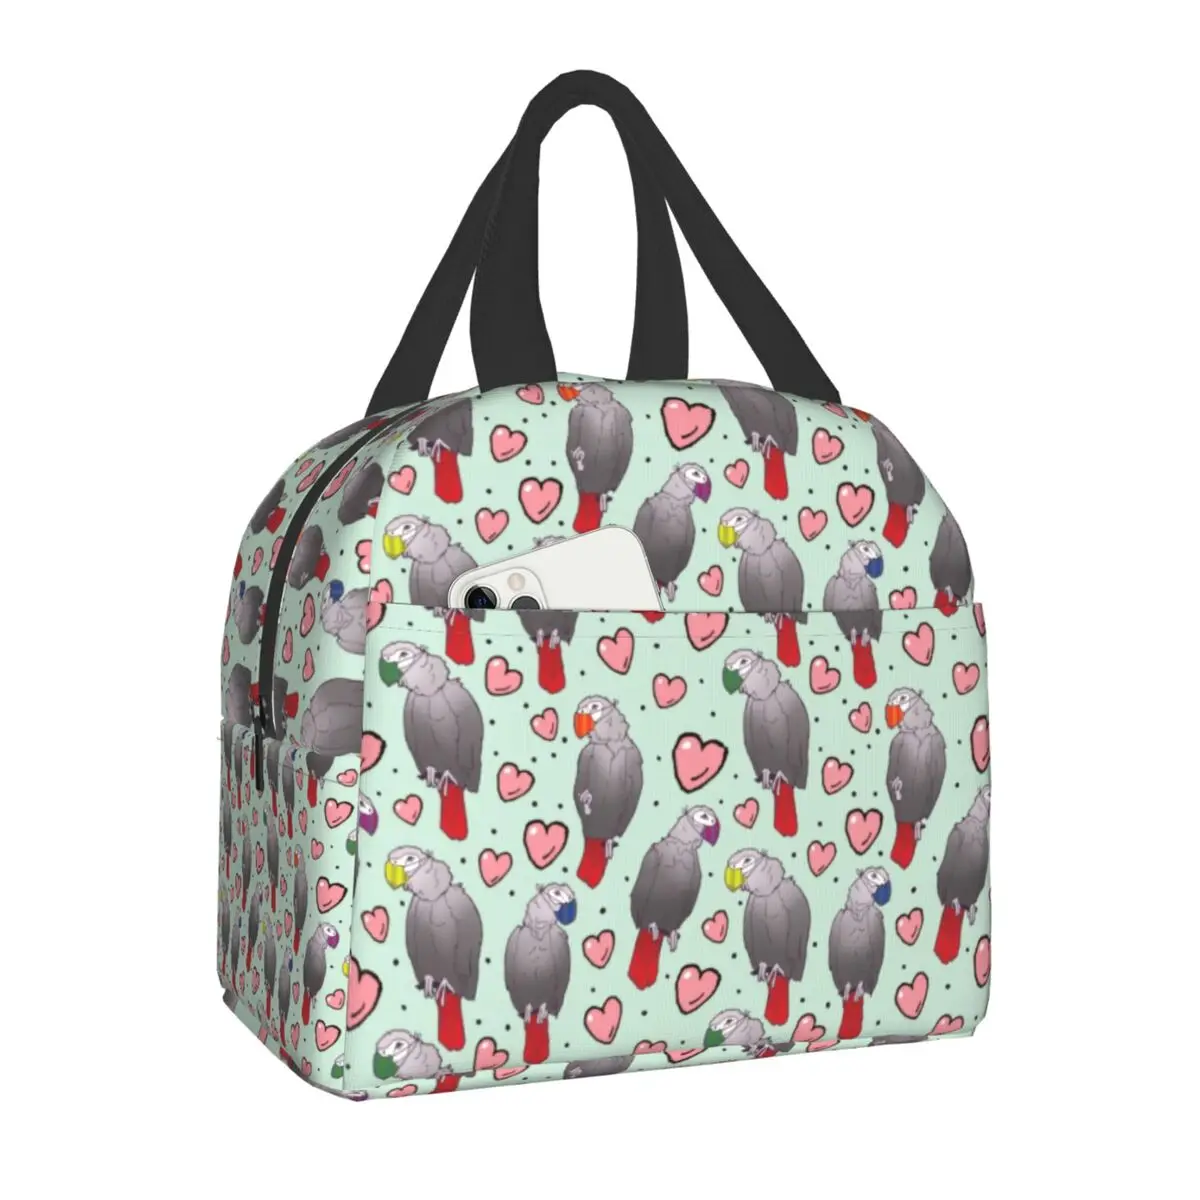 

African Grey Parrot Insulated Lunch Bag for Women Kids School Office Psittacine Birds Resuable Thermal Warm Cooler Bento Box